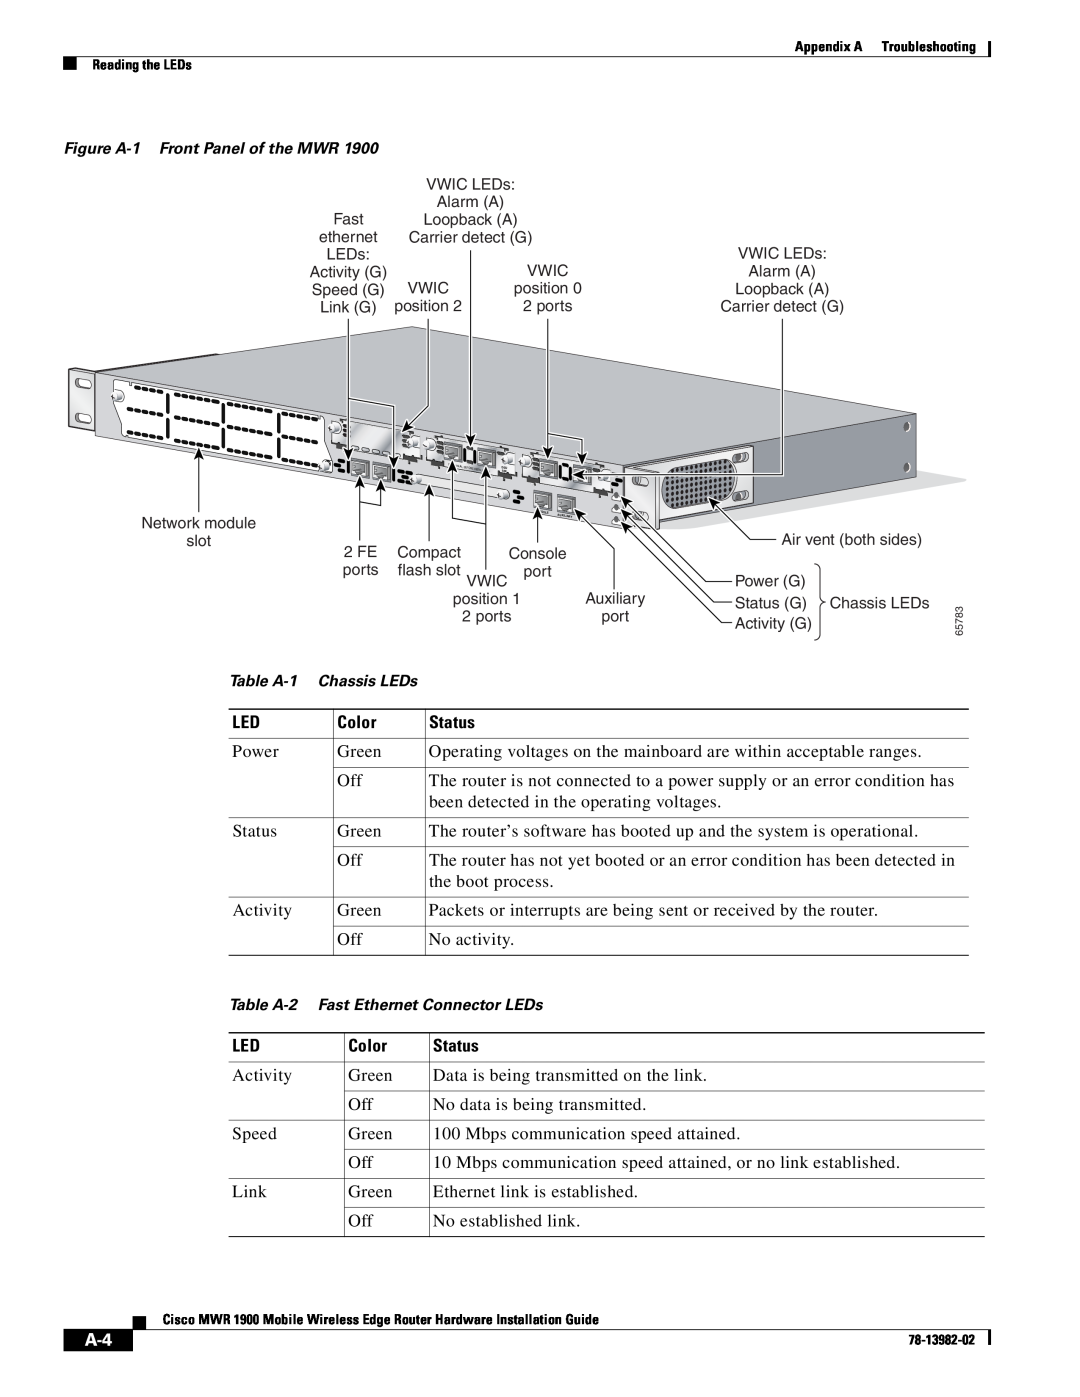 Cisco Systems MWR 1900 manual Figure A-1 Front Panel of the MWR, Table A-2 Fast Ethernet Connector LEDs 